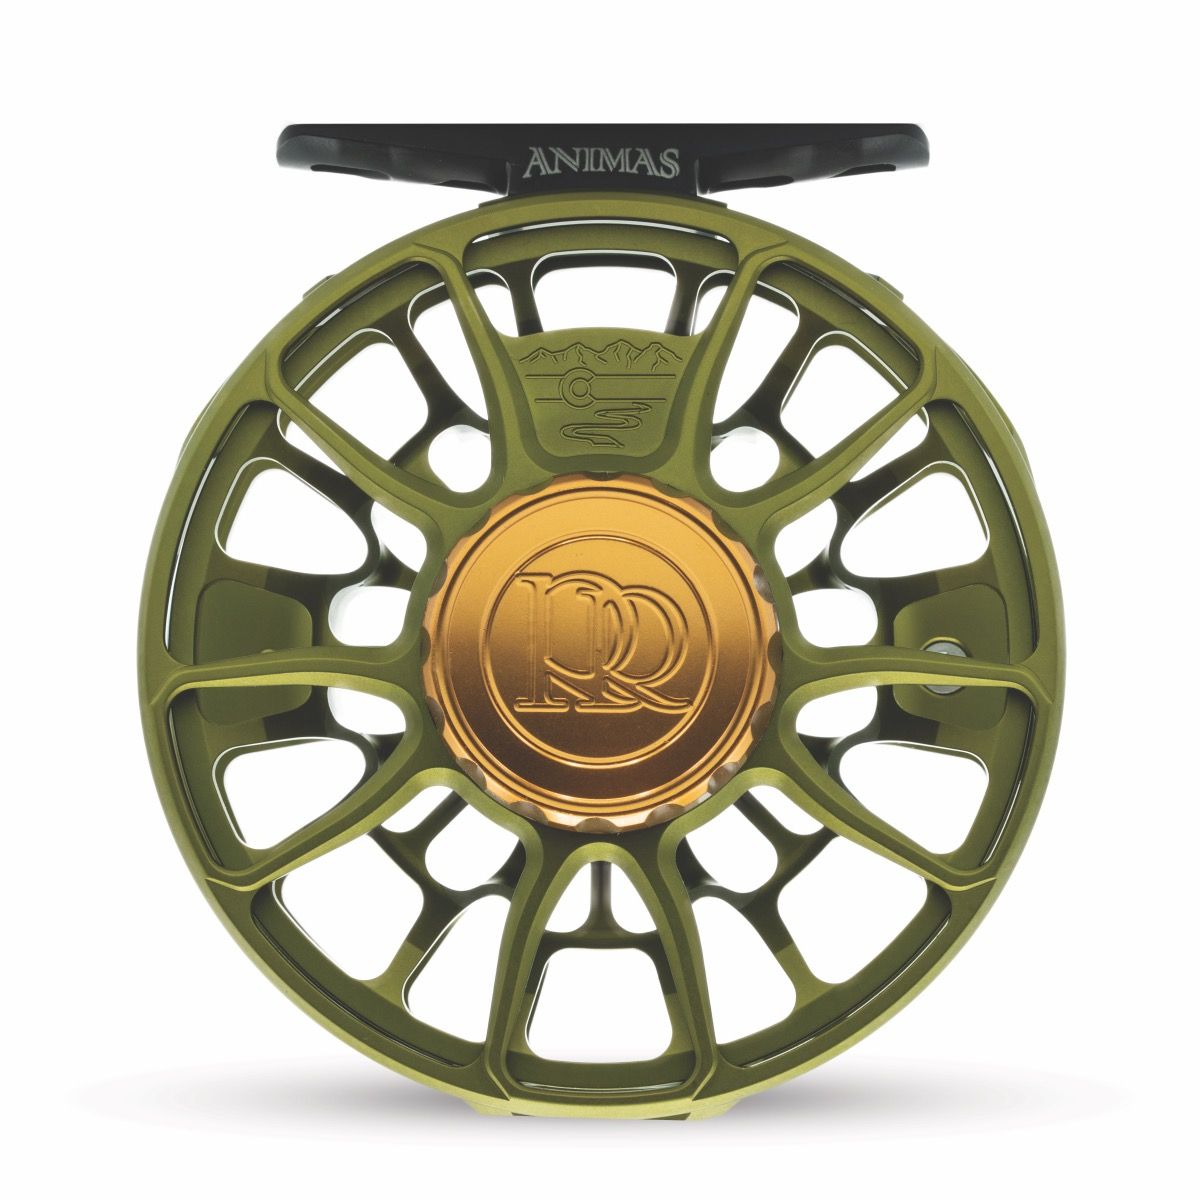 Ross Animas Fly Reel 5/6 wt Matte Olive - Streamside Au Sable River Fly  Fishing Guides